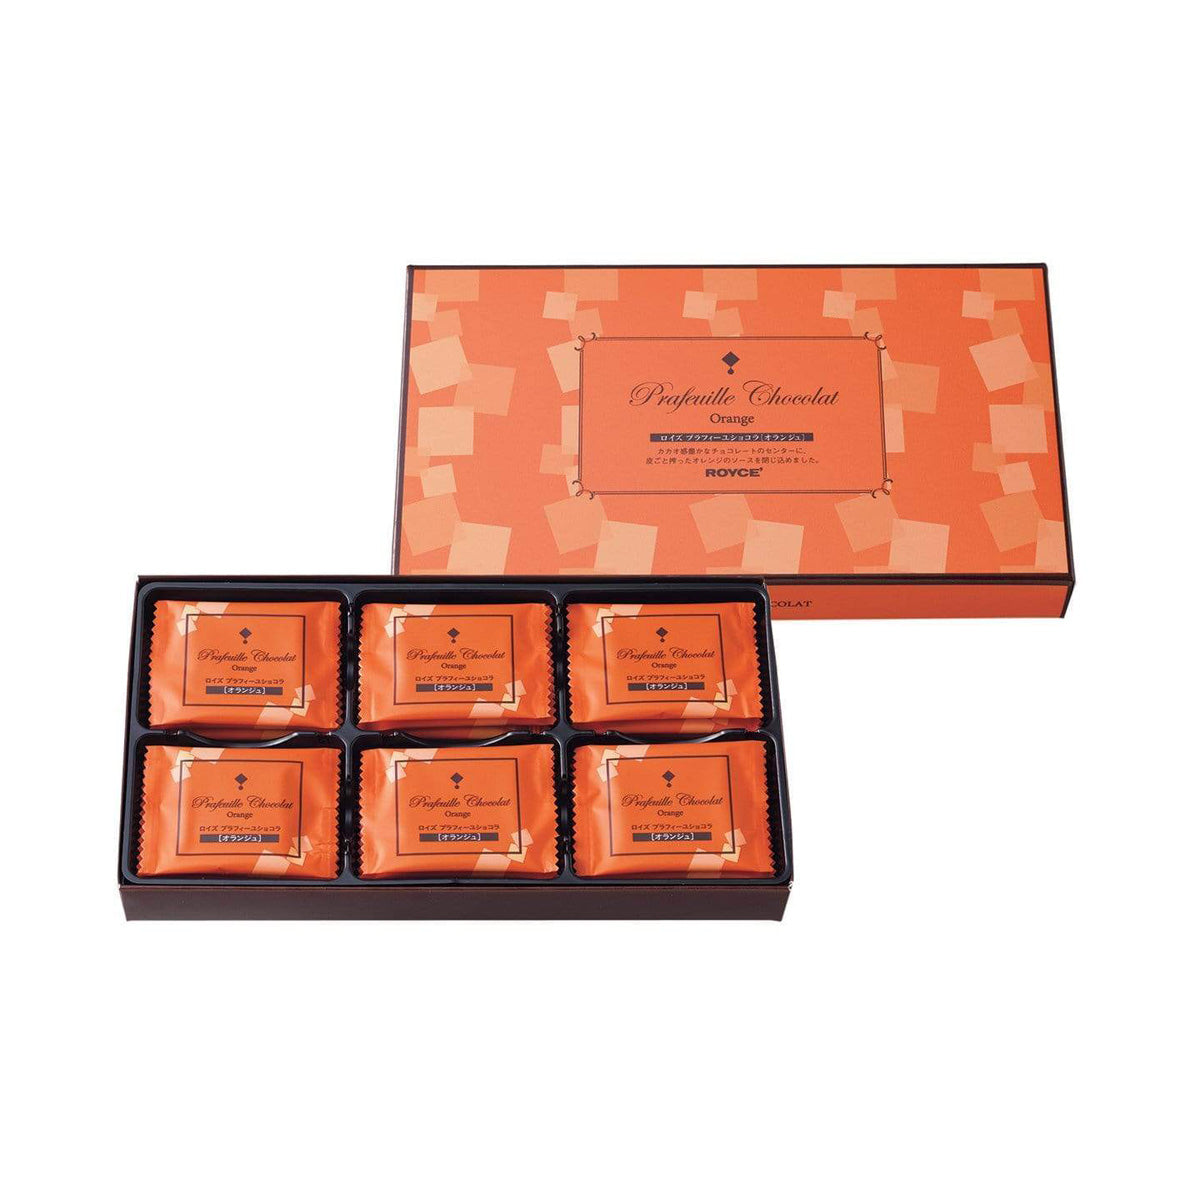 ROYCE' Chocolate - Prafeuille Chocolat "Orange" - Image shows on top center right an orange box with cube prints. Text says Prafeuille Chocolat Orange ROYCE'. Below on center left is a box with individually-wrapped chocolates with orange wrapper and cube prints. Text says Prafeuille Chocolat Orange.